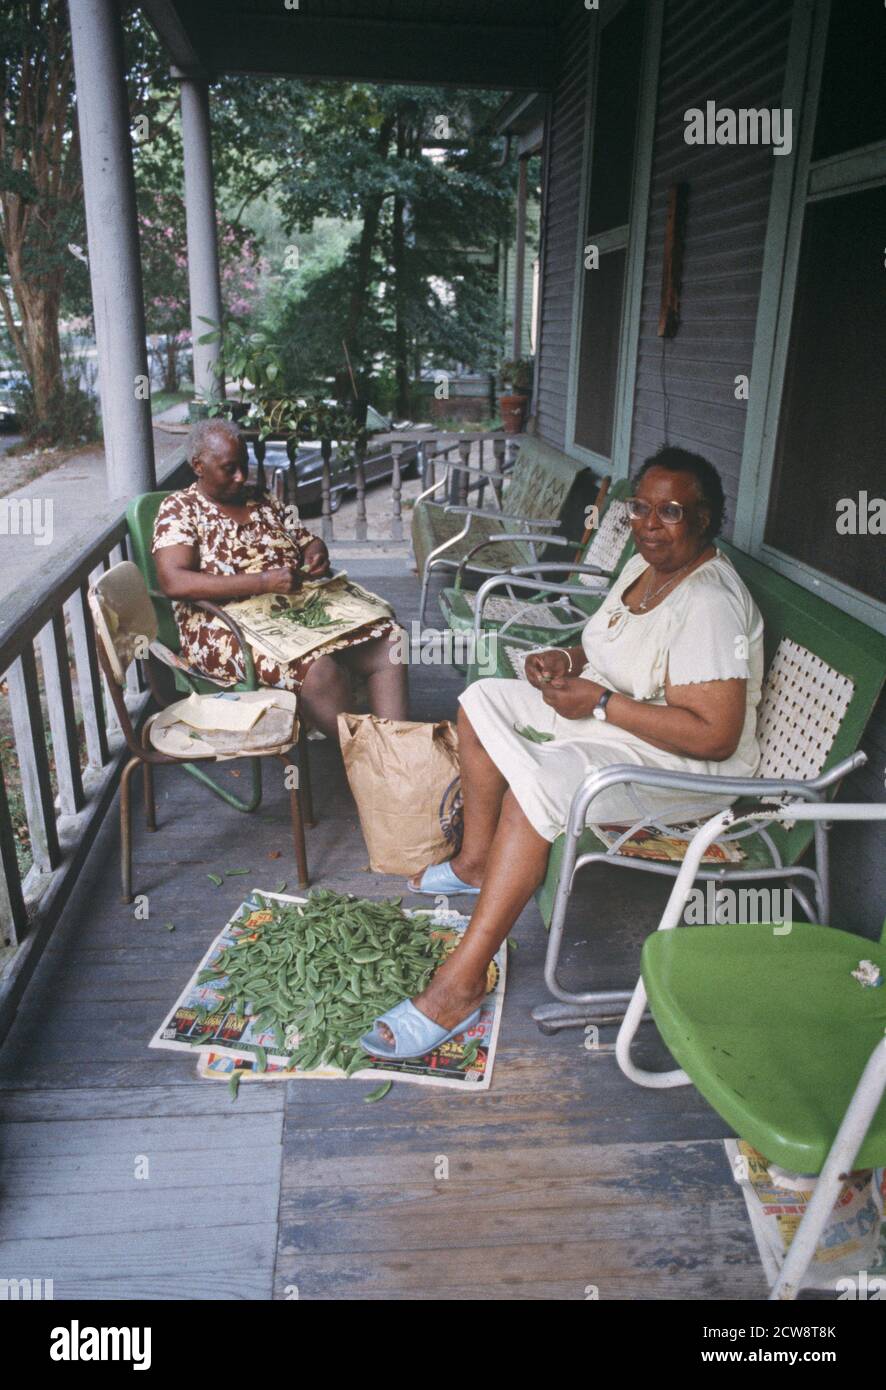 AFRICAN AMERICAN FAMILY SHELLING PEAS IN PORCH IN DOWNTOWN SAVANNAH, GEORGIA, USA,1980s Stock Photo